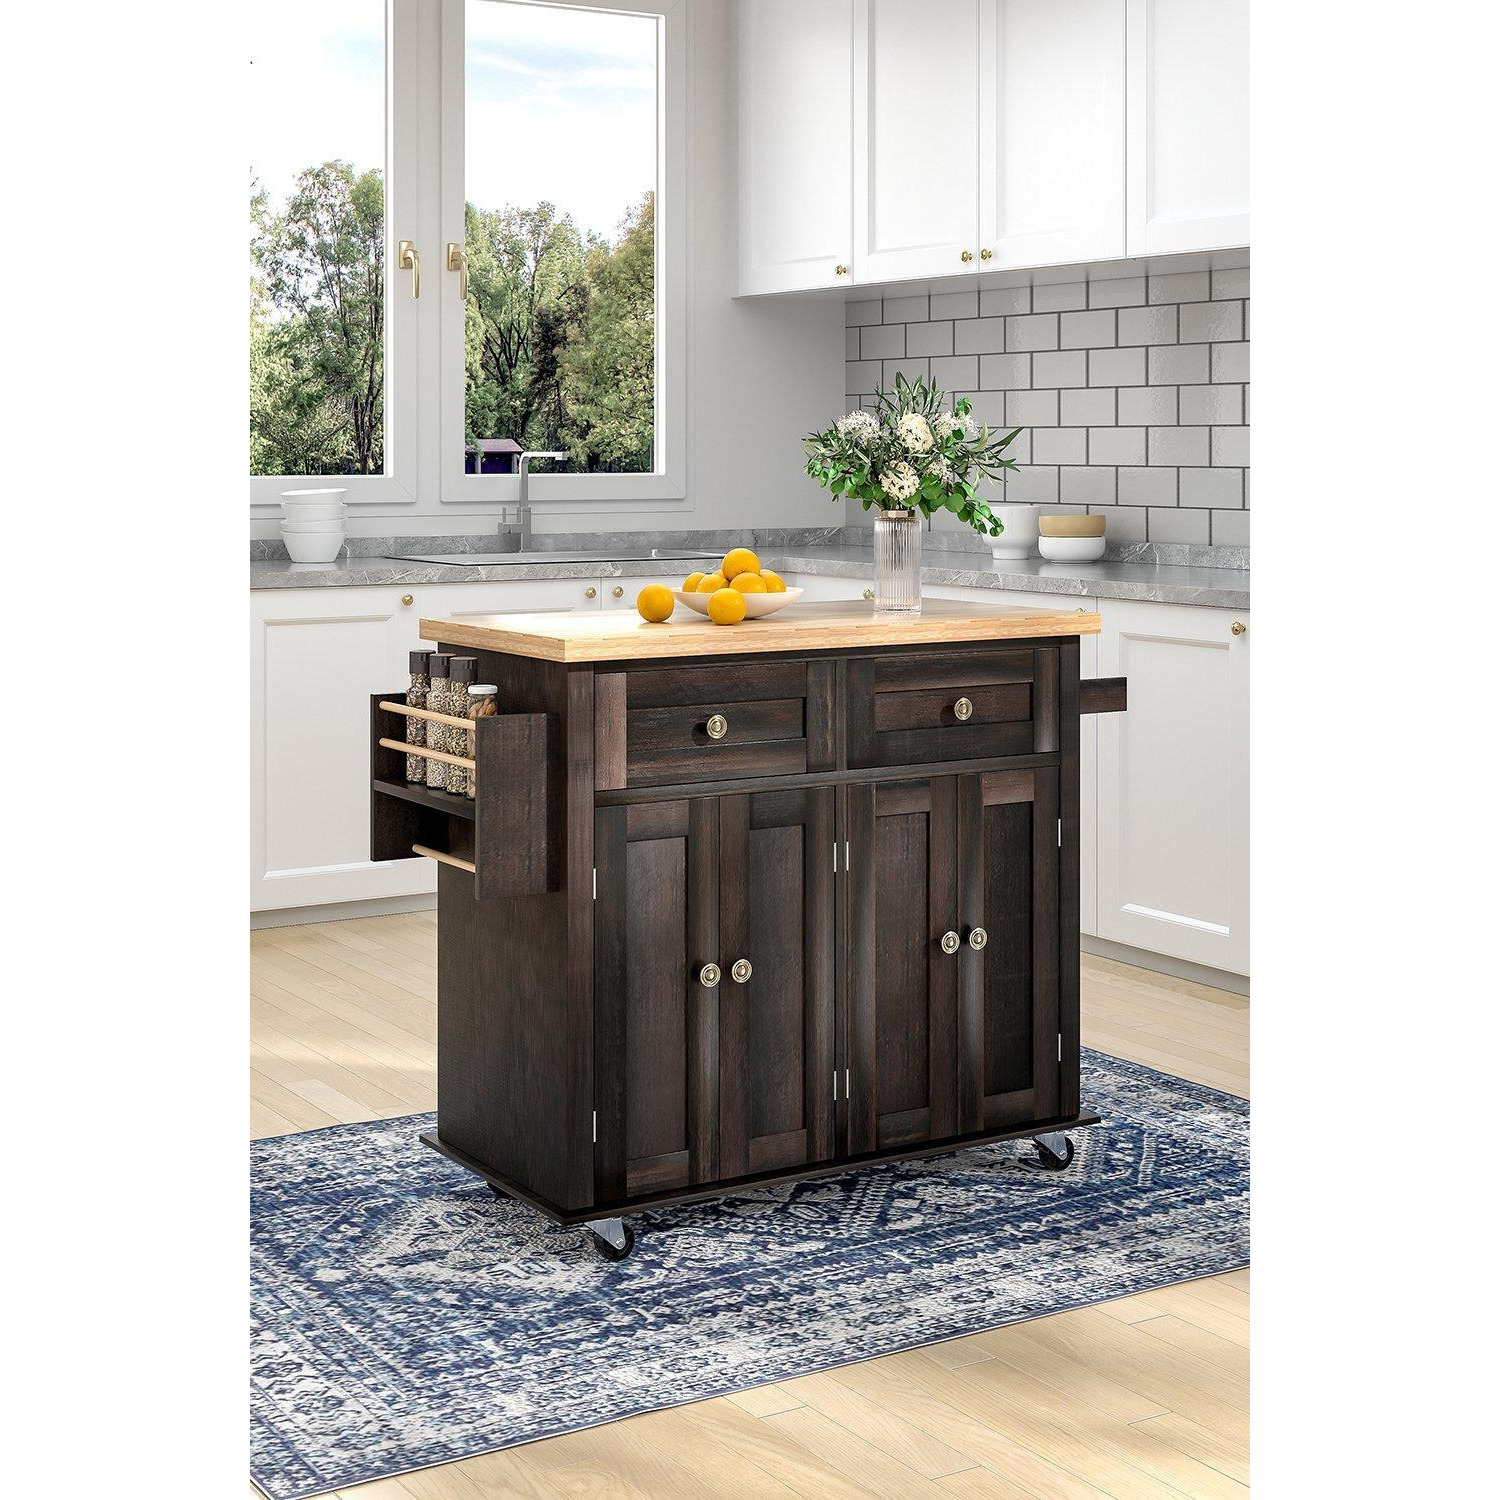 Modern Rolling Wooden Kitchen Island Cart with Storage Cabinets - image 1